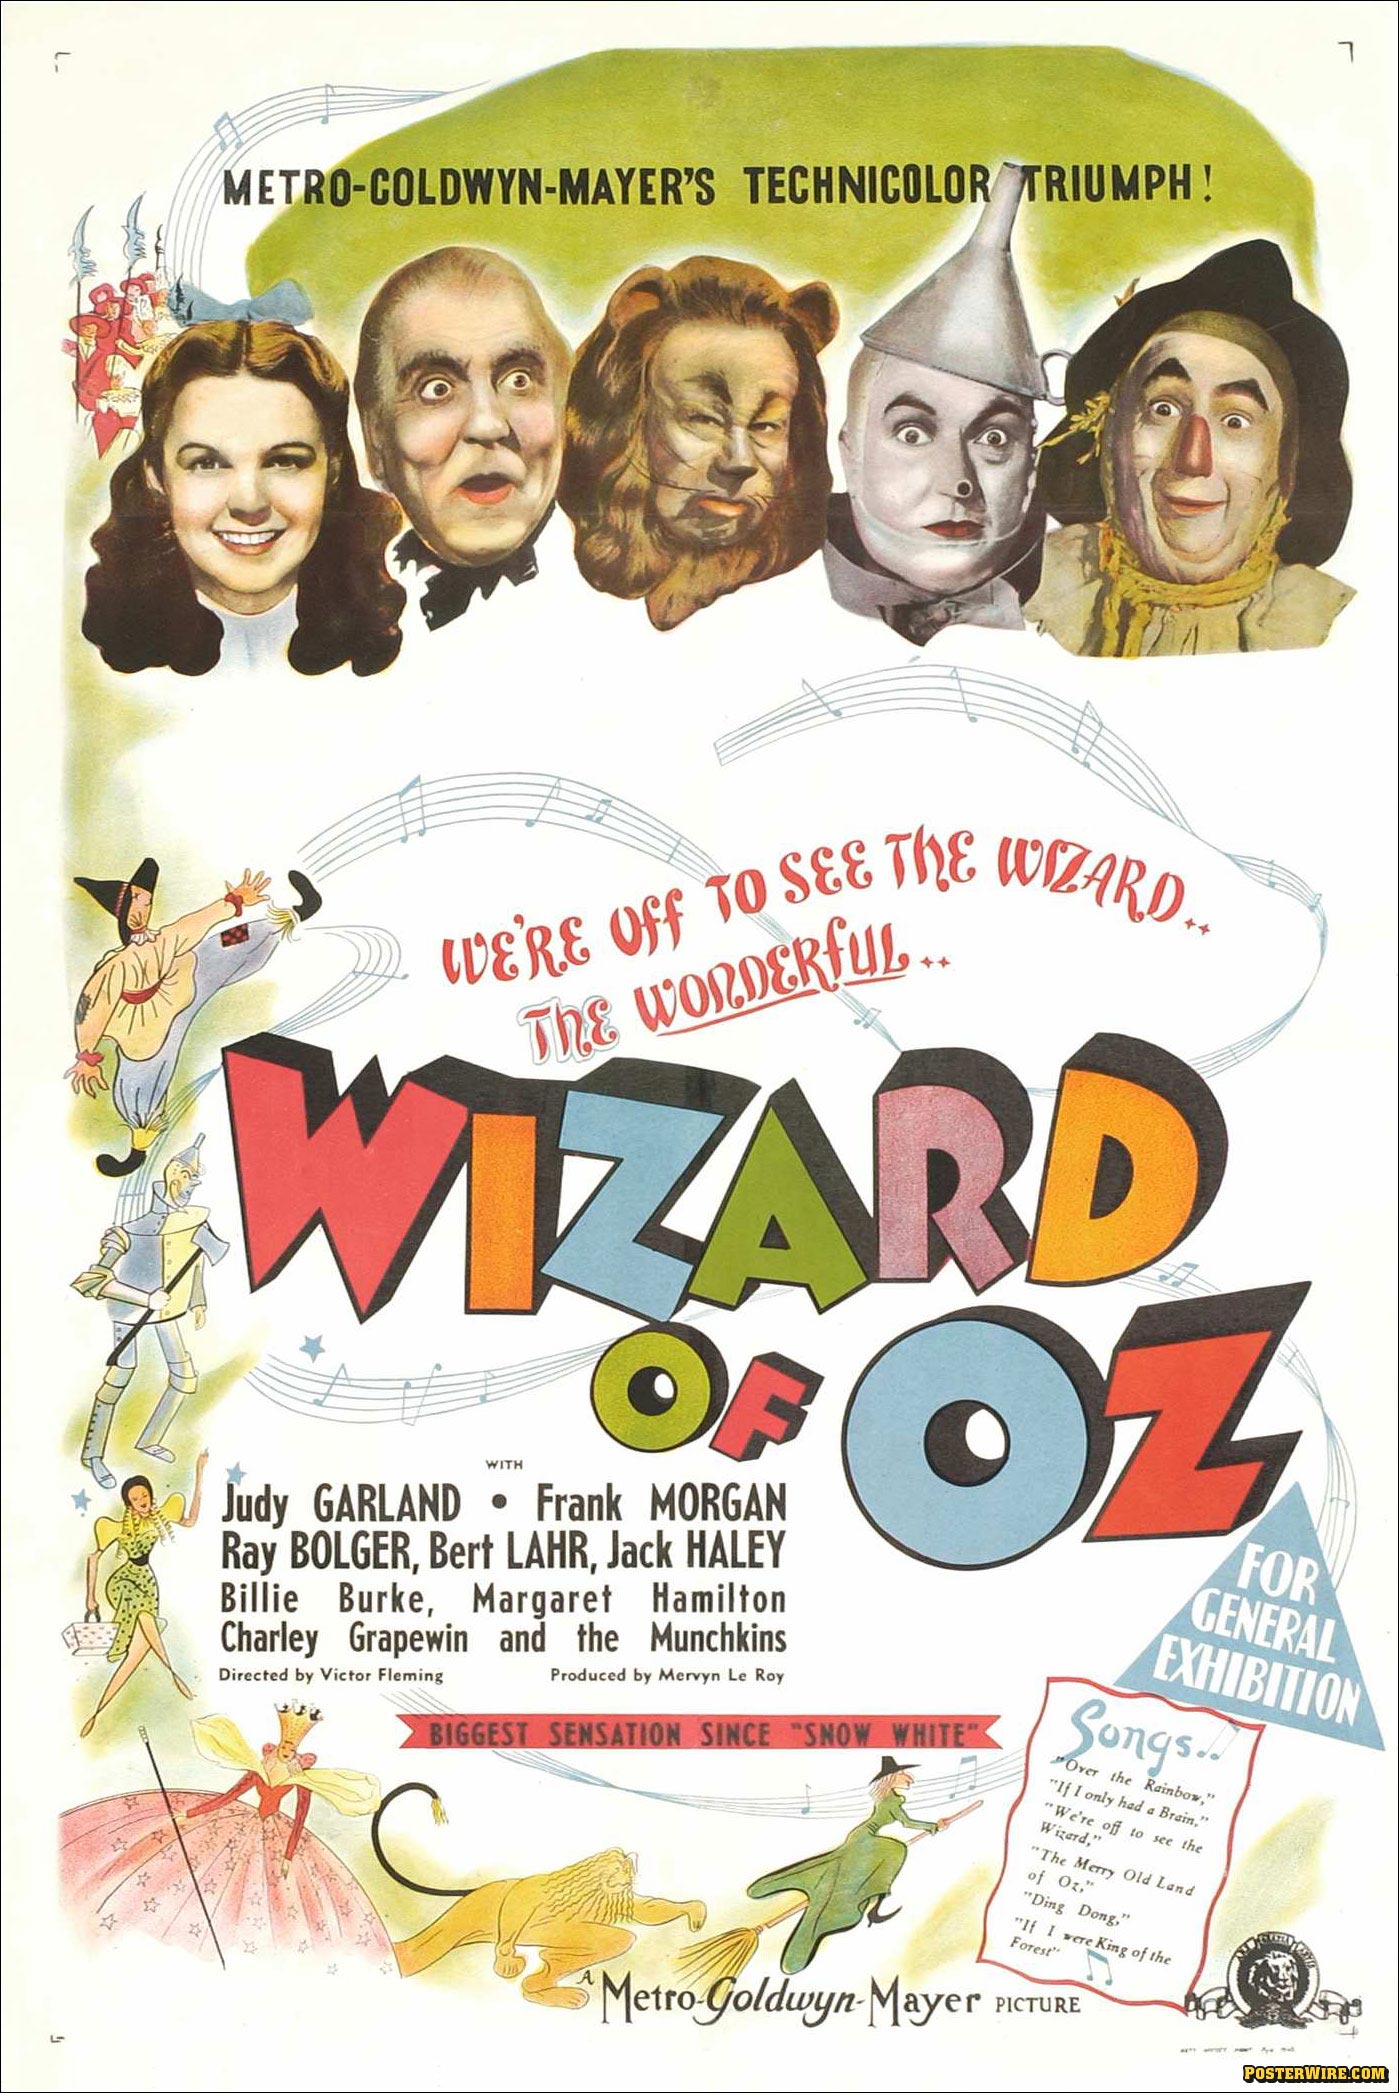 http://www.posterwire.com/wp-content/images/wizard_of_oz.jpg